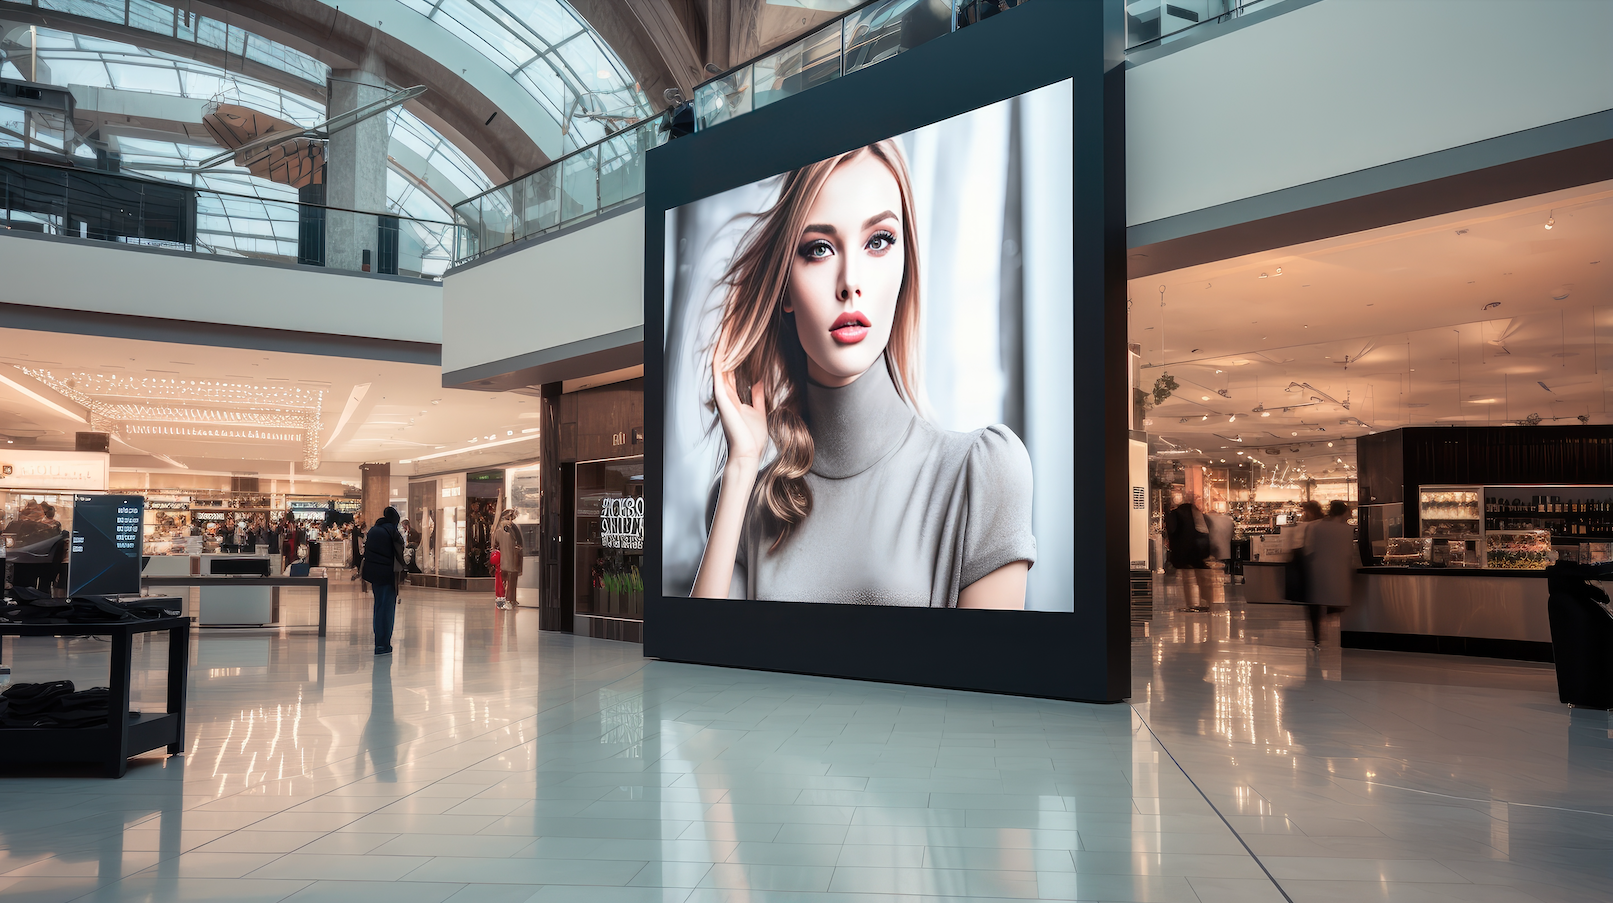 Creating Immersive Experiences with LED Video Walls and Digital Signage